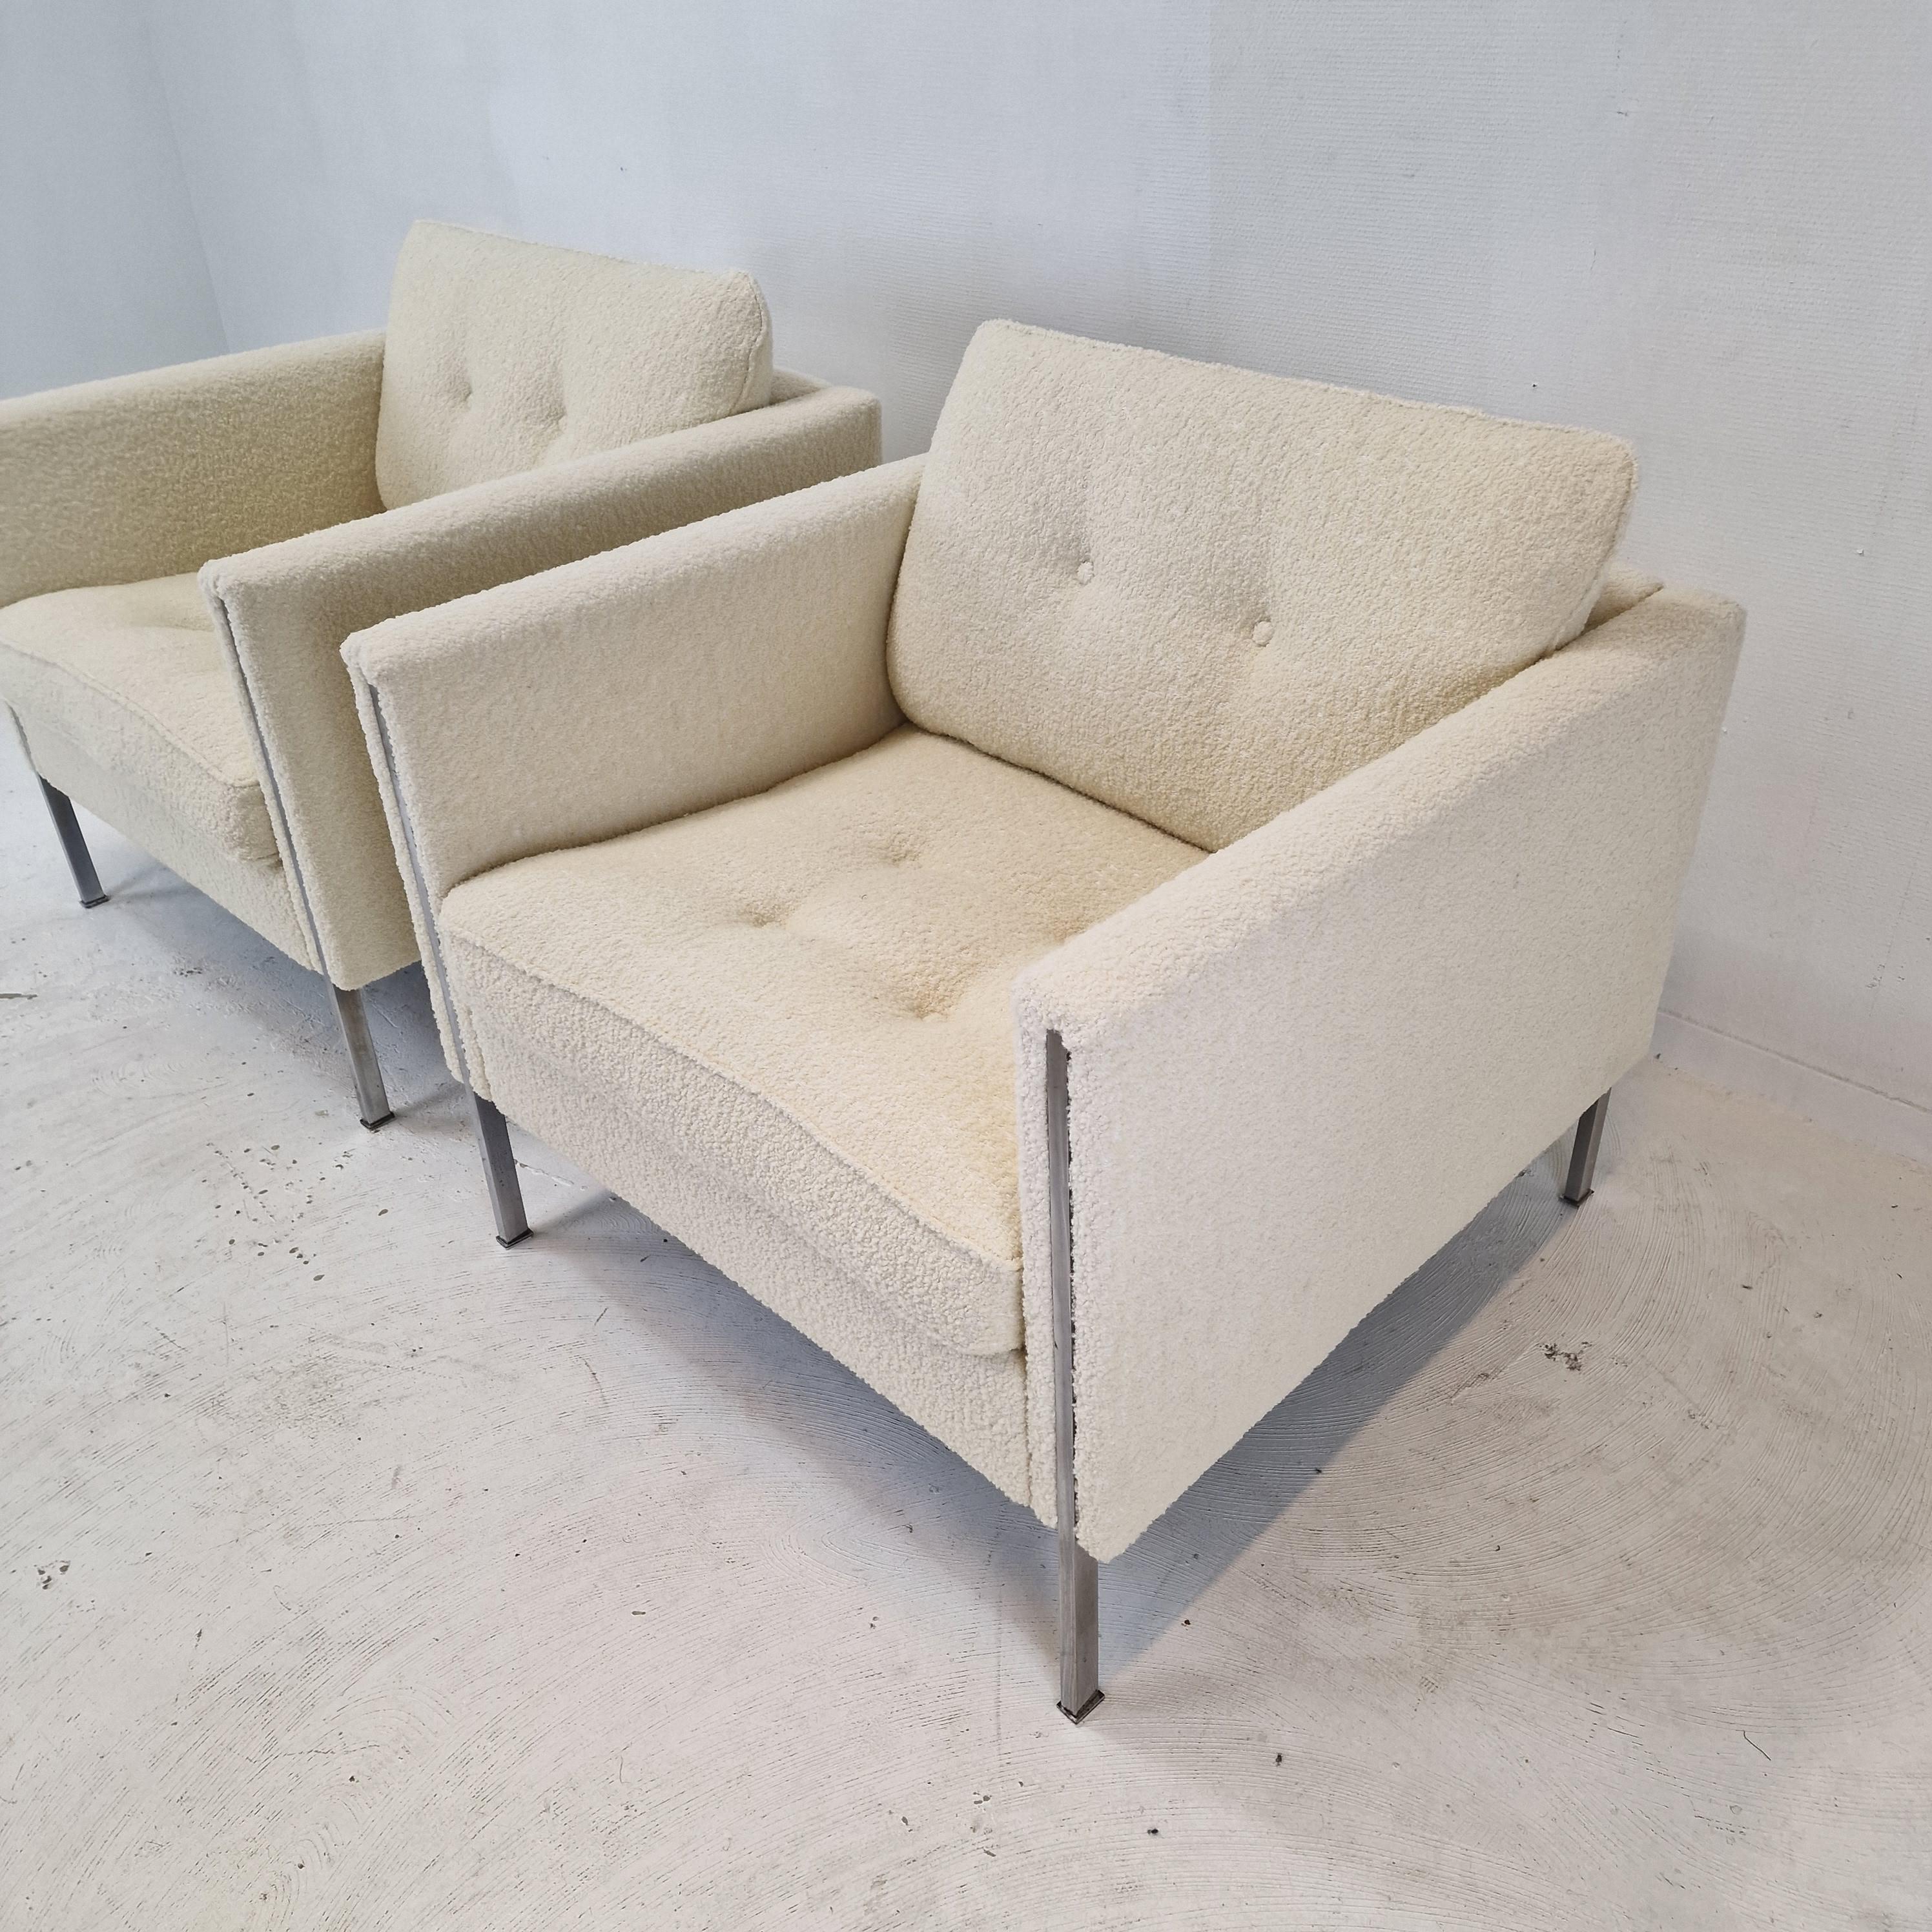 Midcentury Set of 2 Model 442 Chairs by Pierre Paulin for Artifort, 1960s For Sale 1